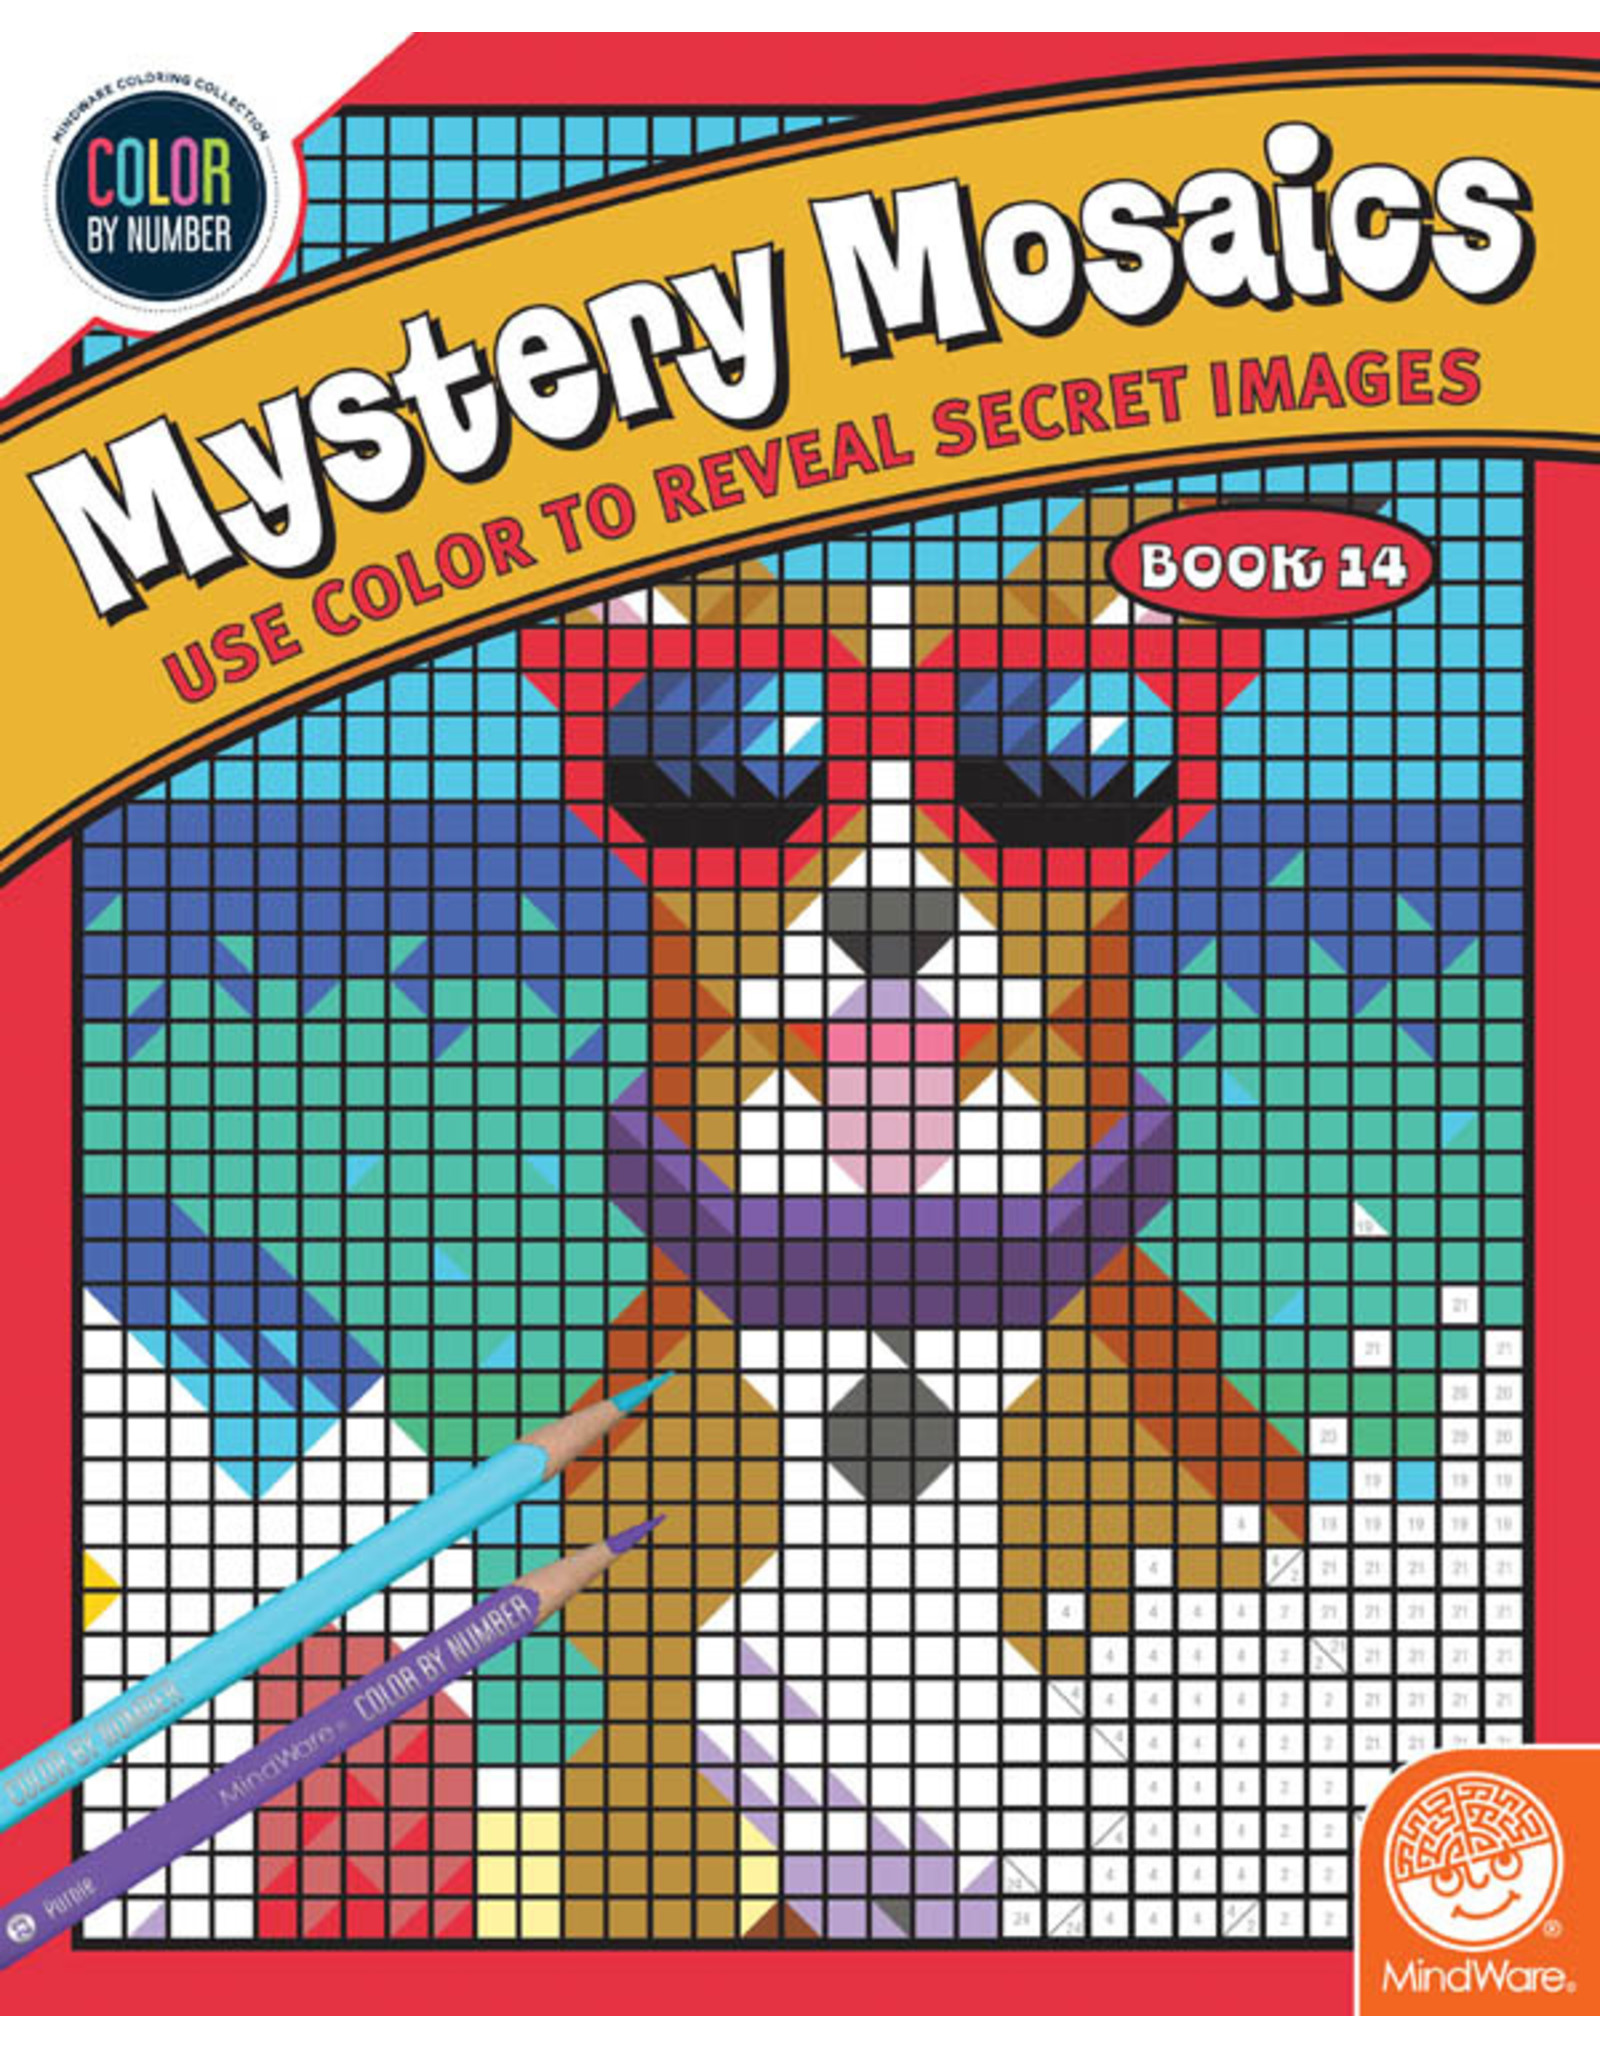 MYSTERY MOSAICS BOOK 14 (COLOR BY NUMBER)